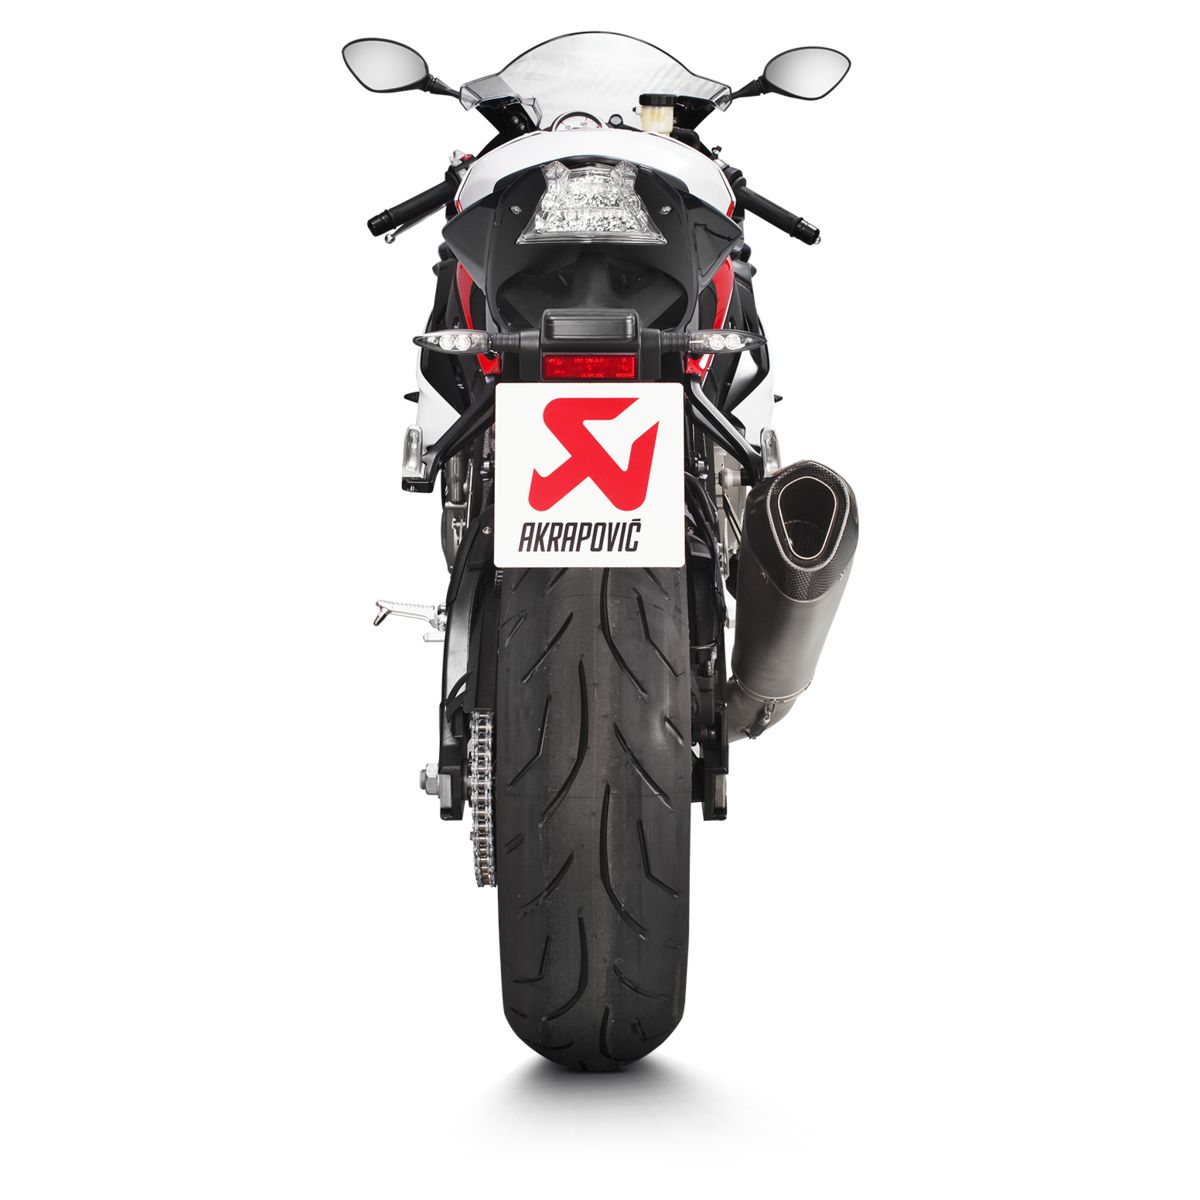 Akrapovic Evolution Exhaust System for BMW S1000RR 2019